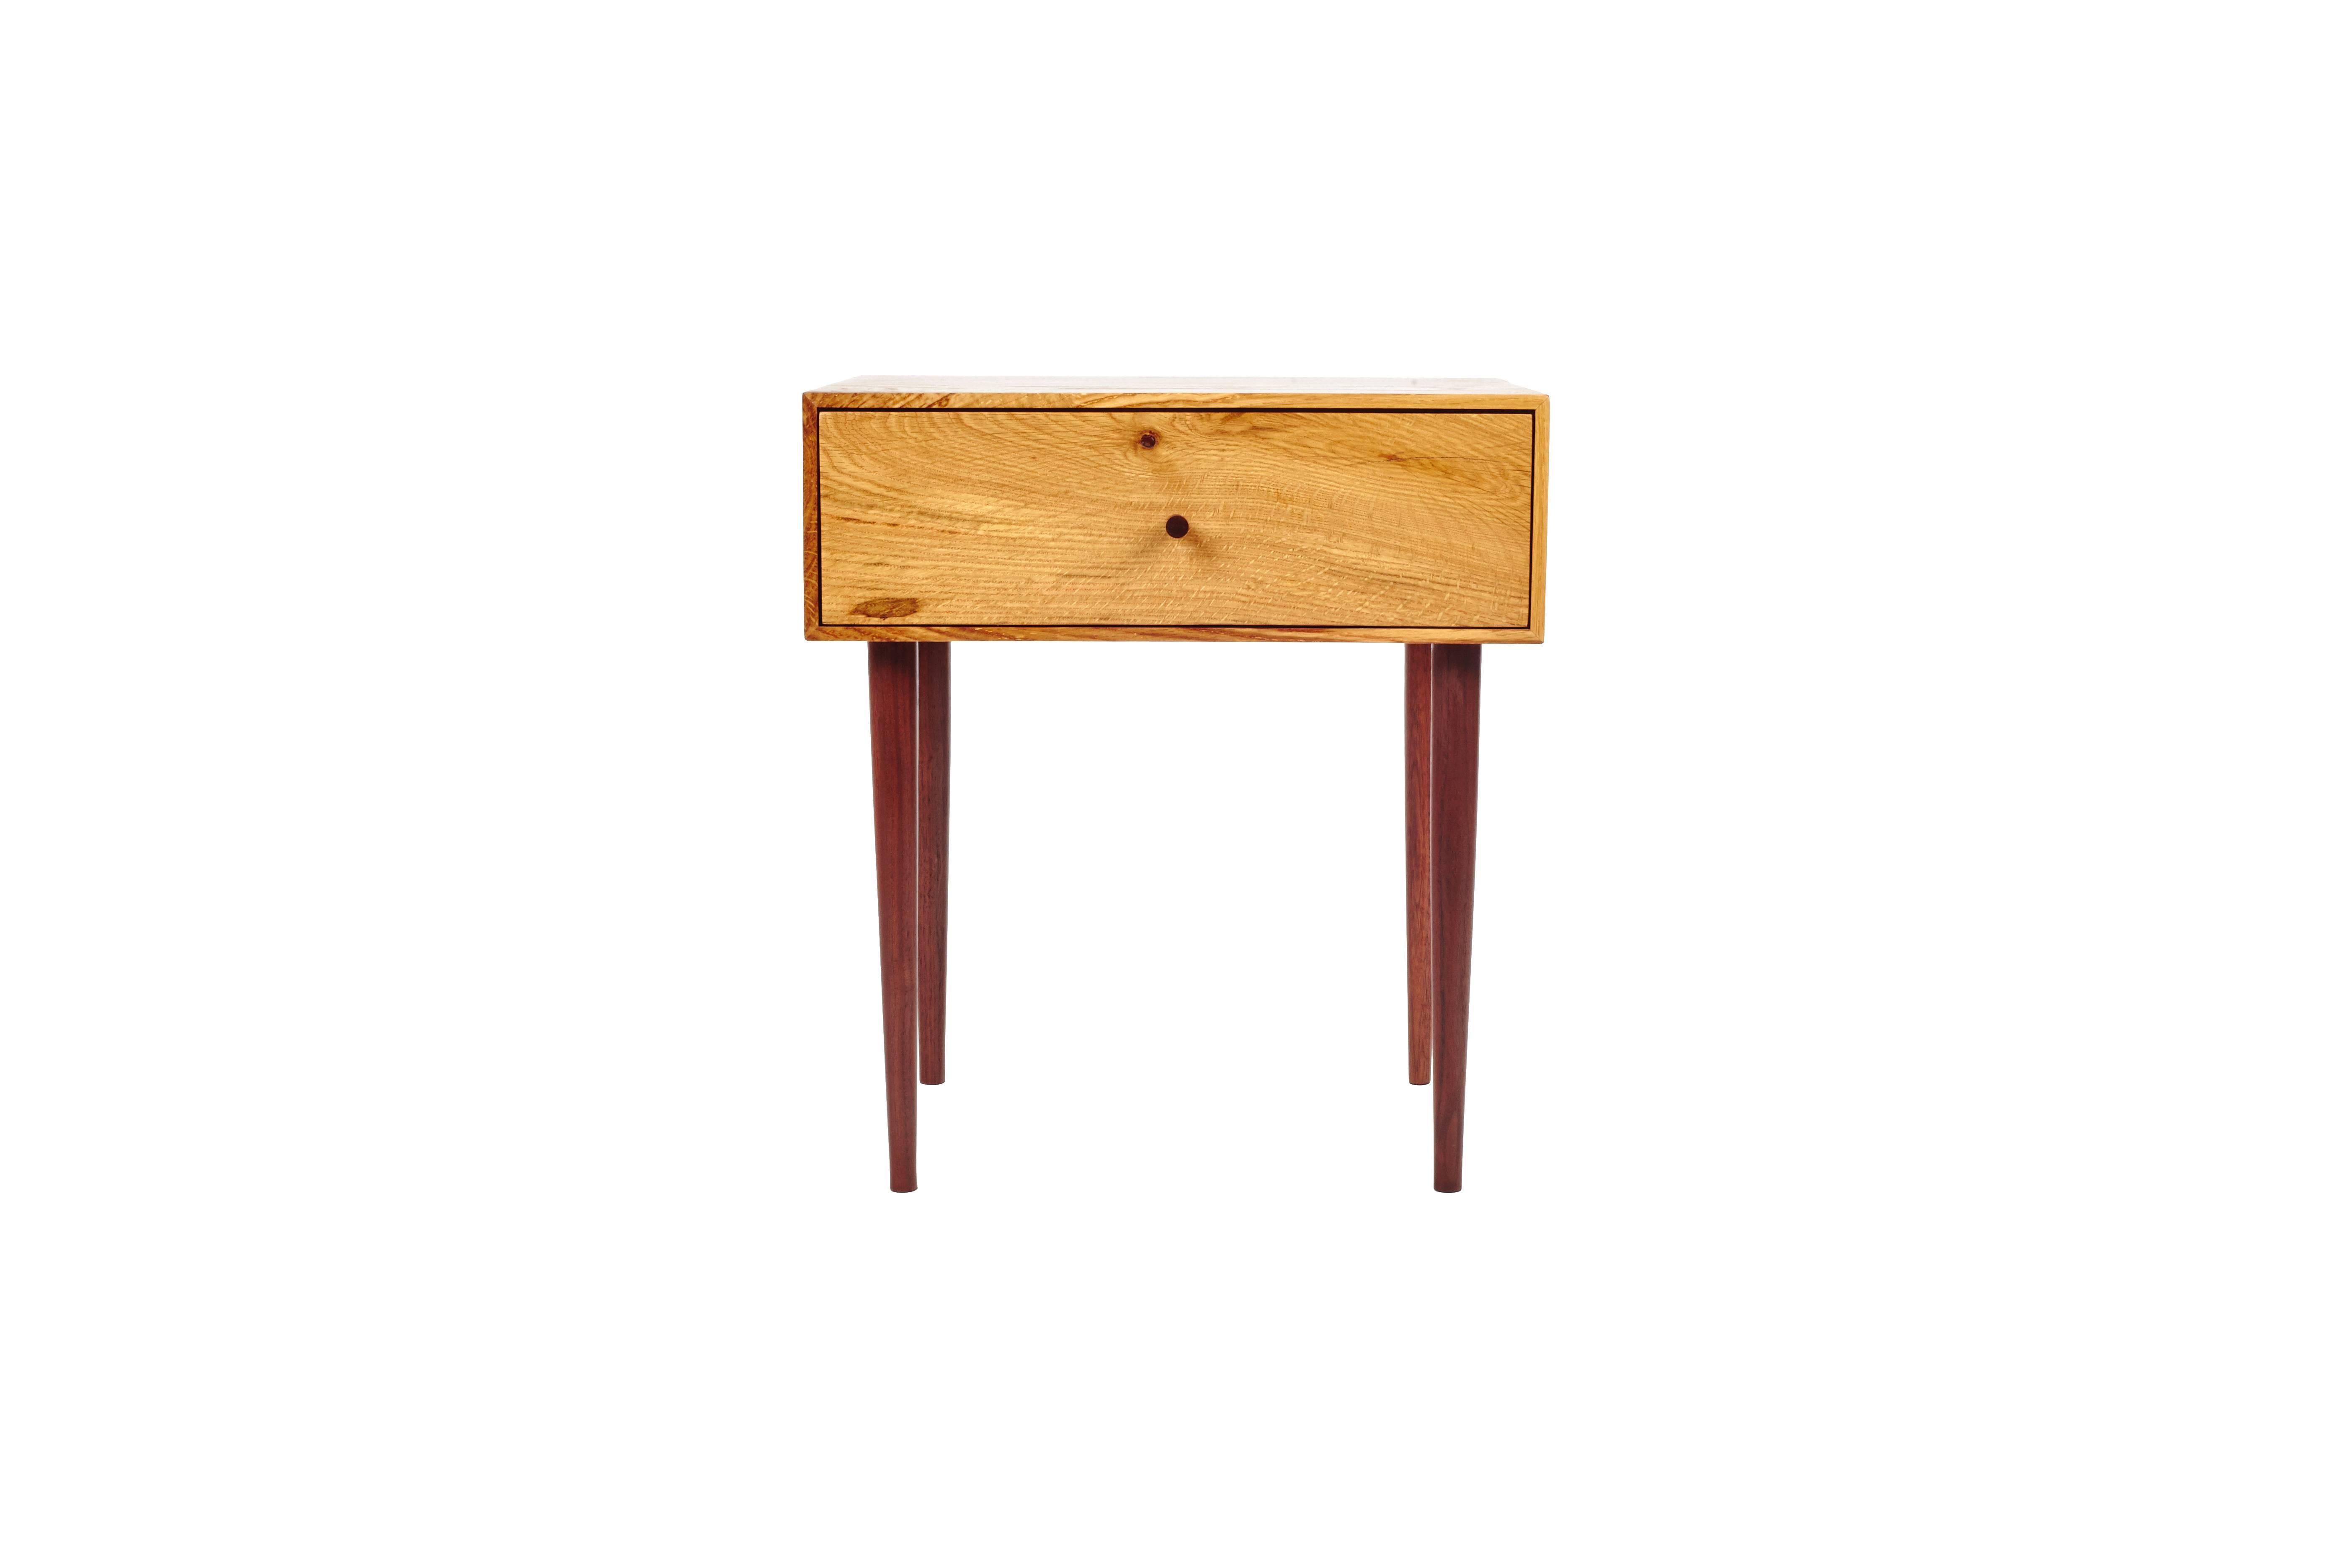 Two Sisters End Table, Edition of 8. Each Chestnut Oak case is comprised of an inch thick single board, which, with mitered corners, wraps around each piece. Every knot and whorl is carefully considered as we select the orientation of the board